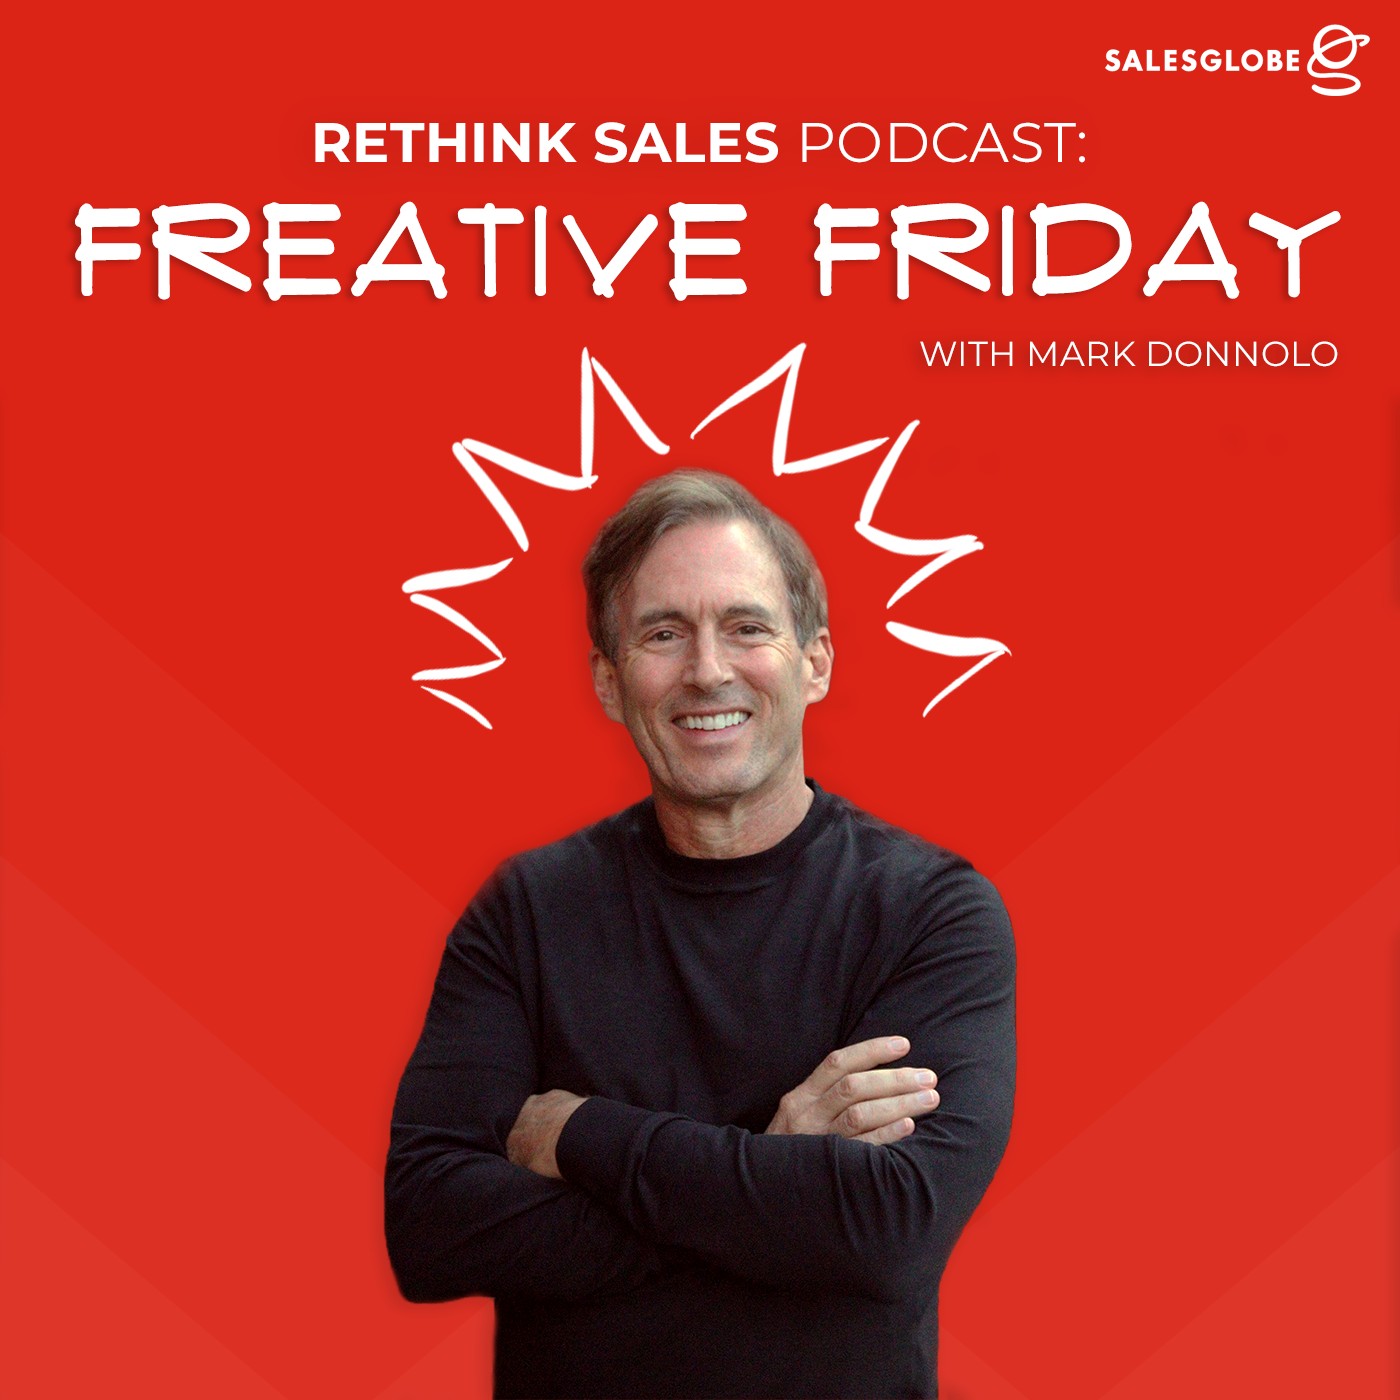 68: Freative Friday - Increasing ROSI by Increasing Your Sales Time